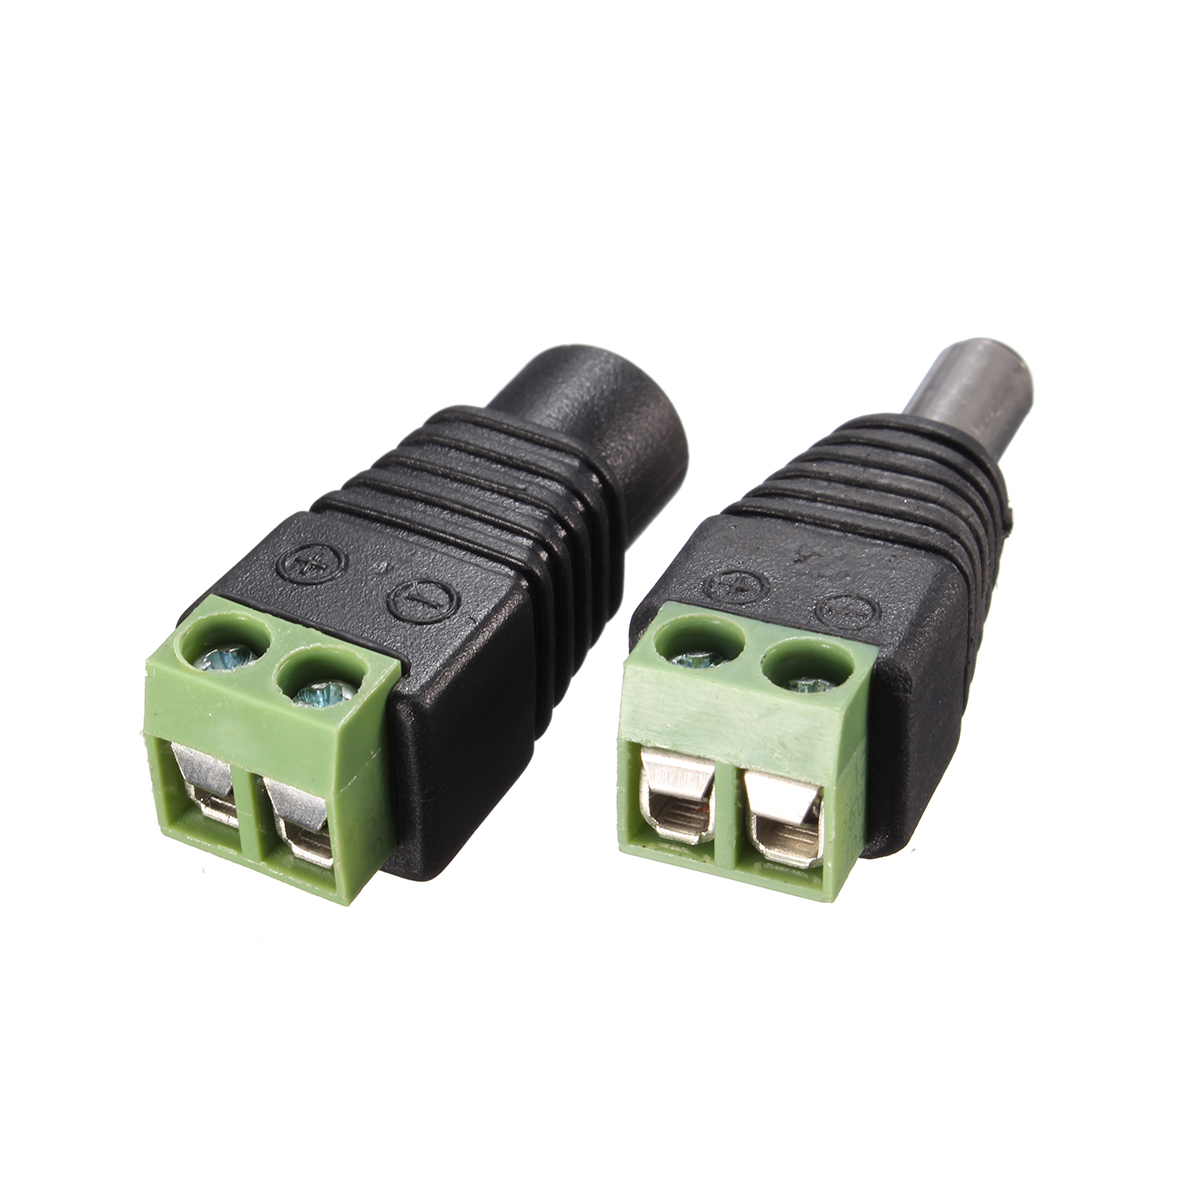 1-pairs-DC-Connector-Male-Female-55mm-For-LED-Strip-Light-CCTV-Camera-1145981